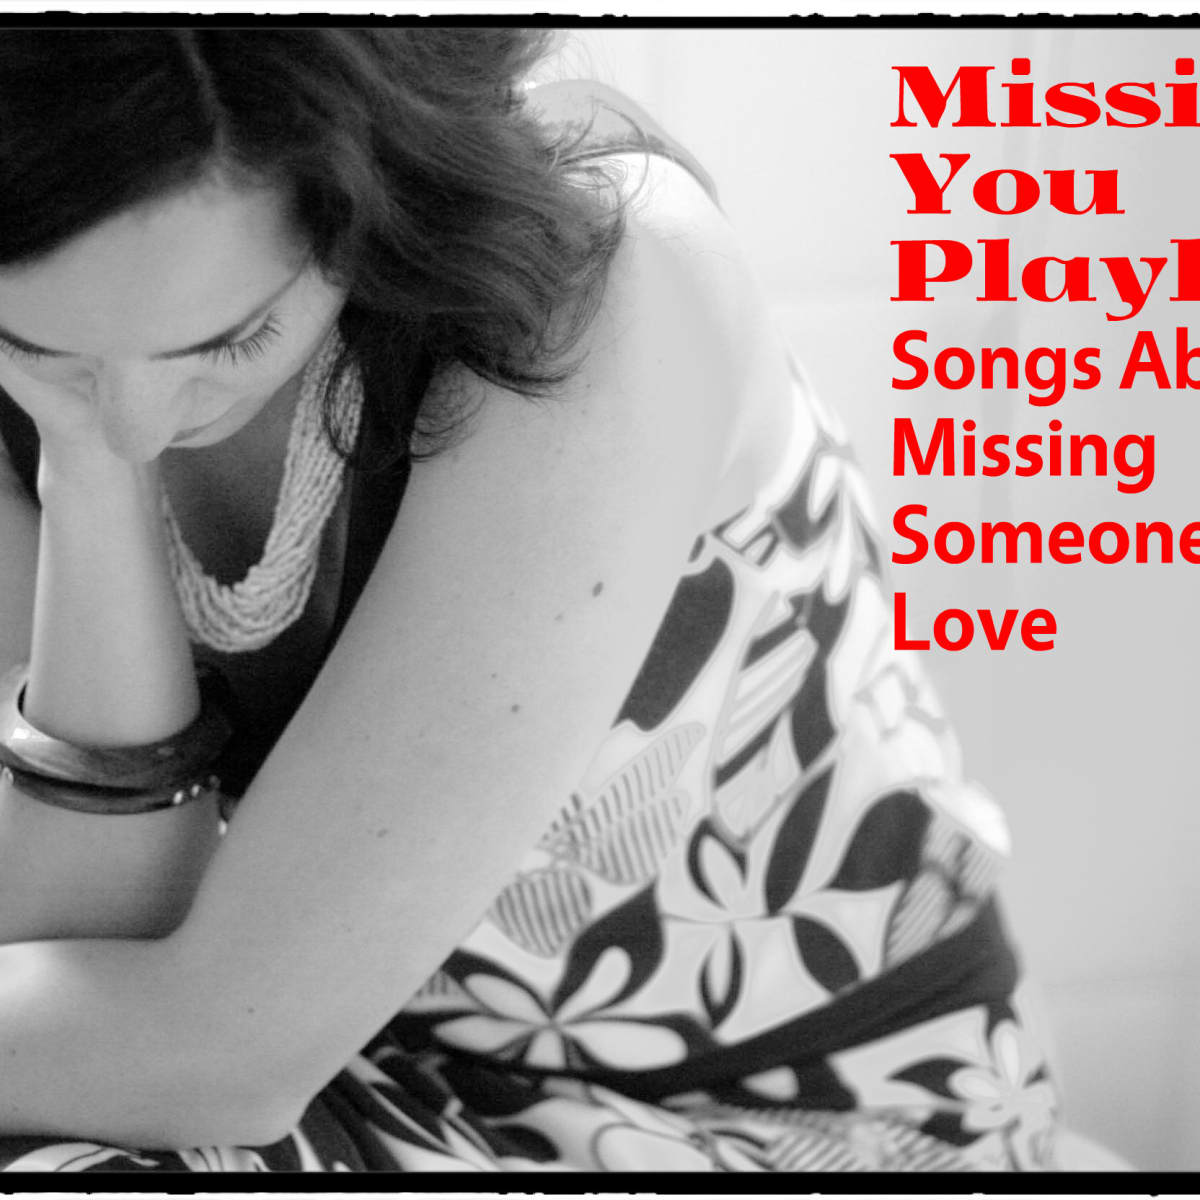 A missing one loved about songs Songs About